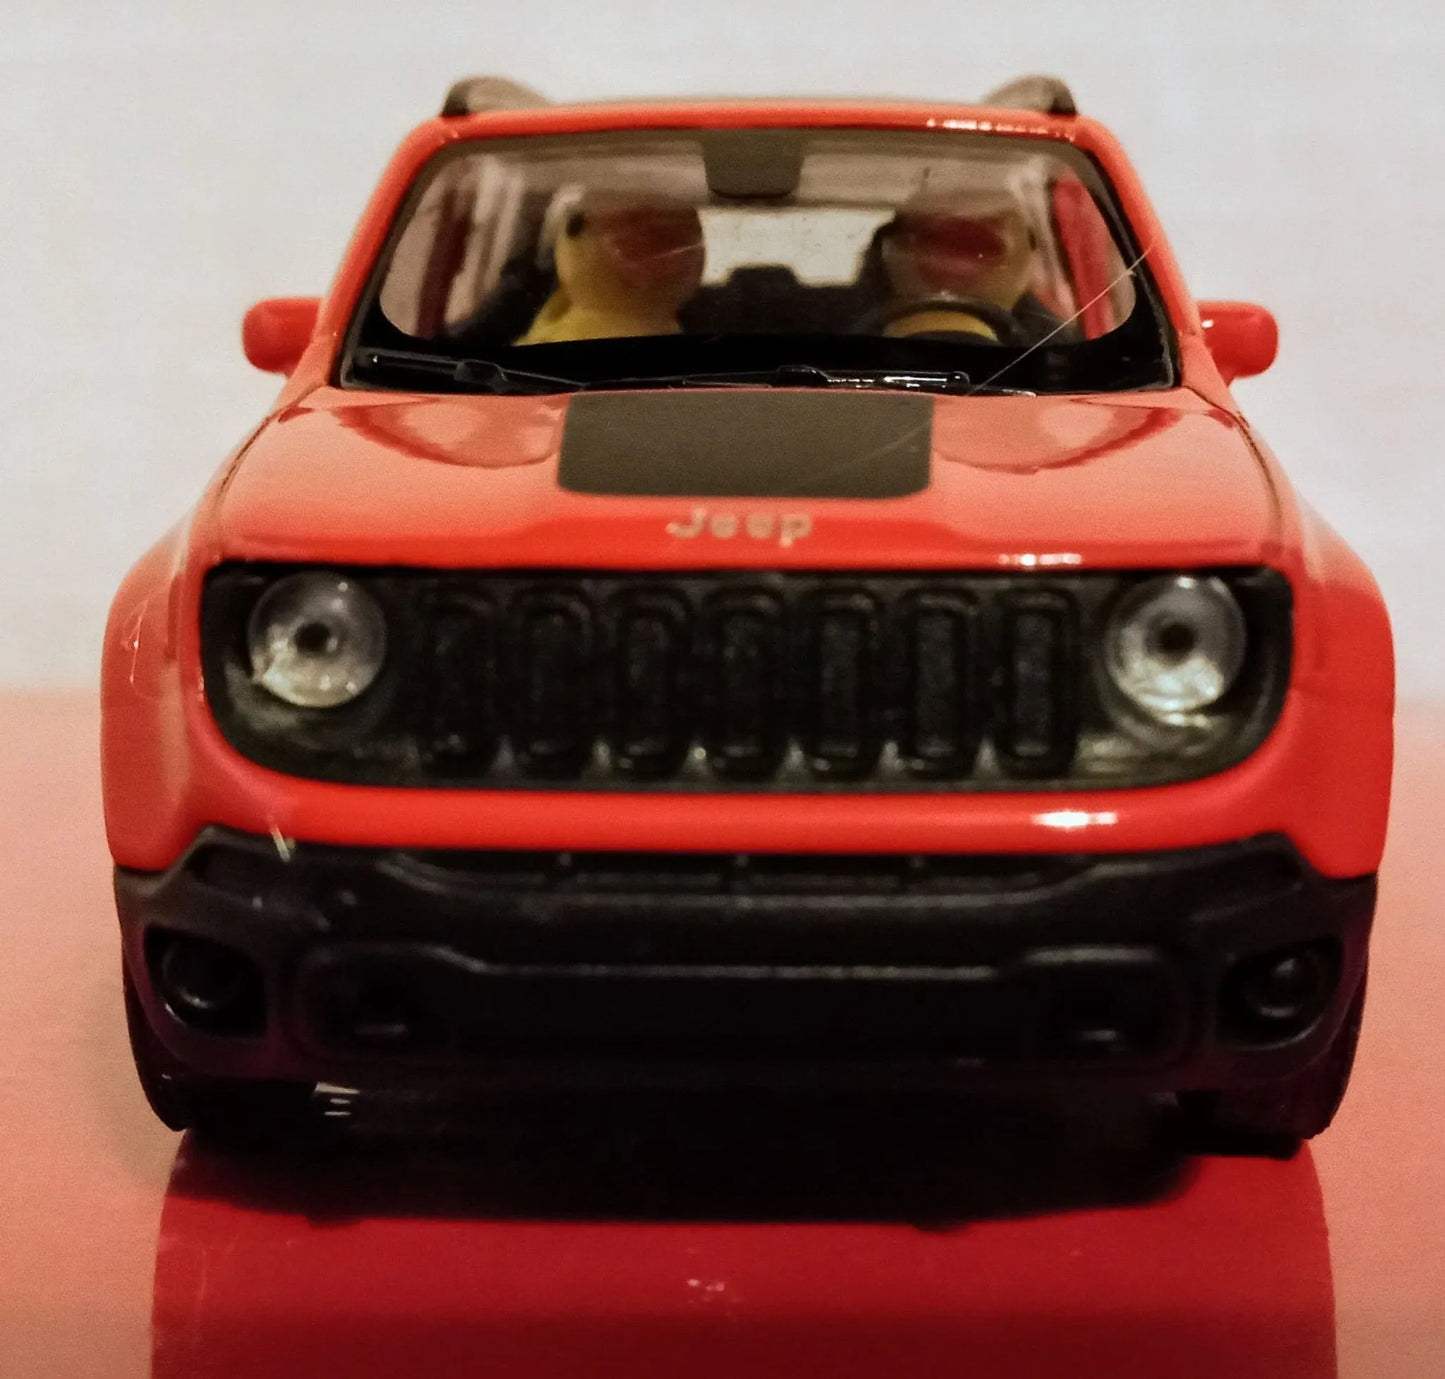 Jeep Renegade Welly Trailhawk